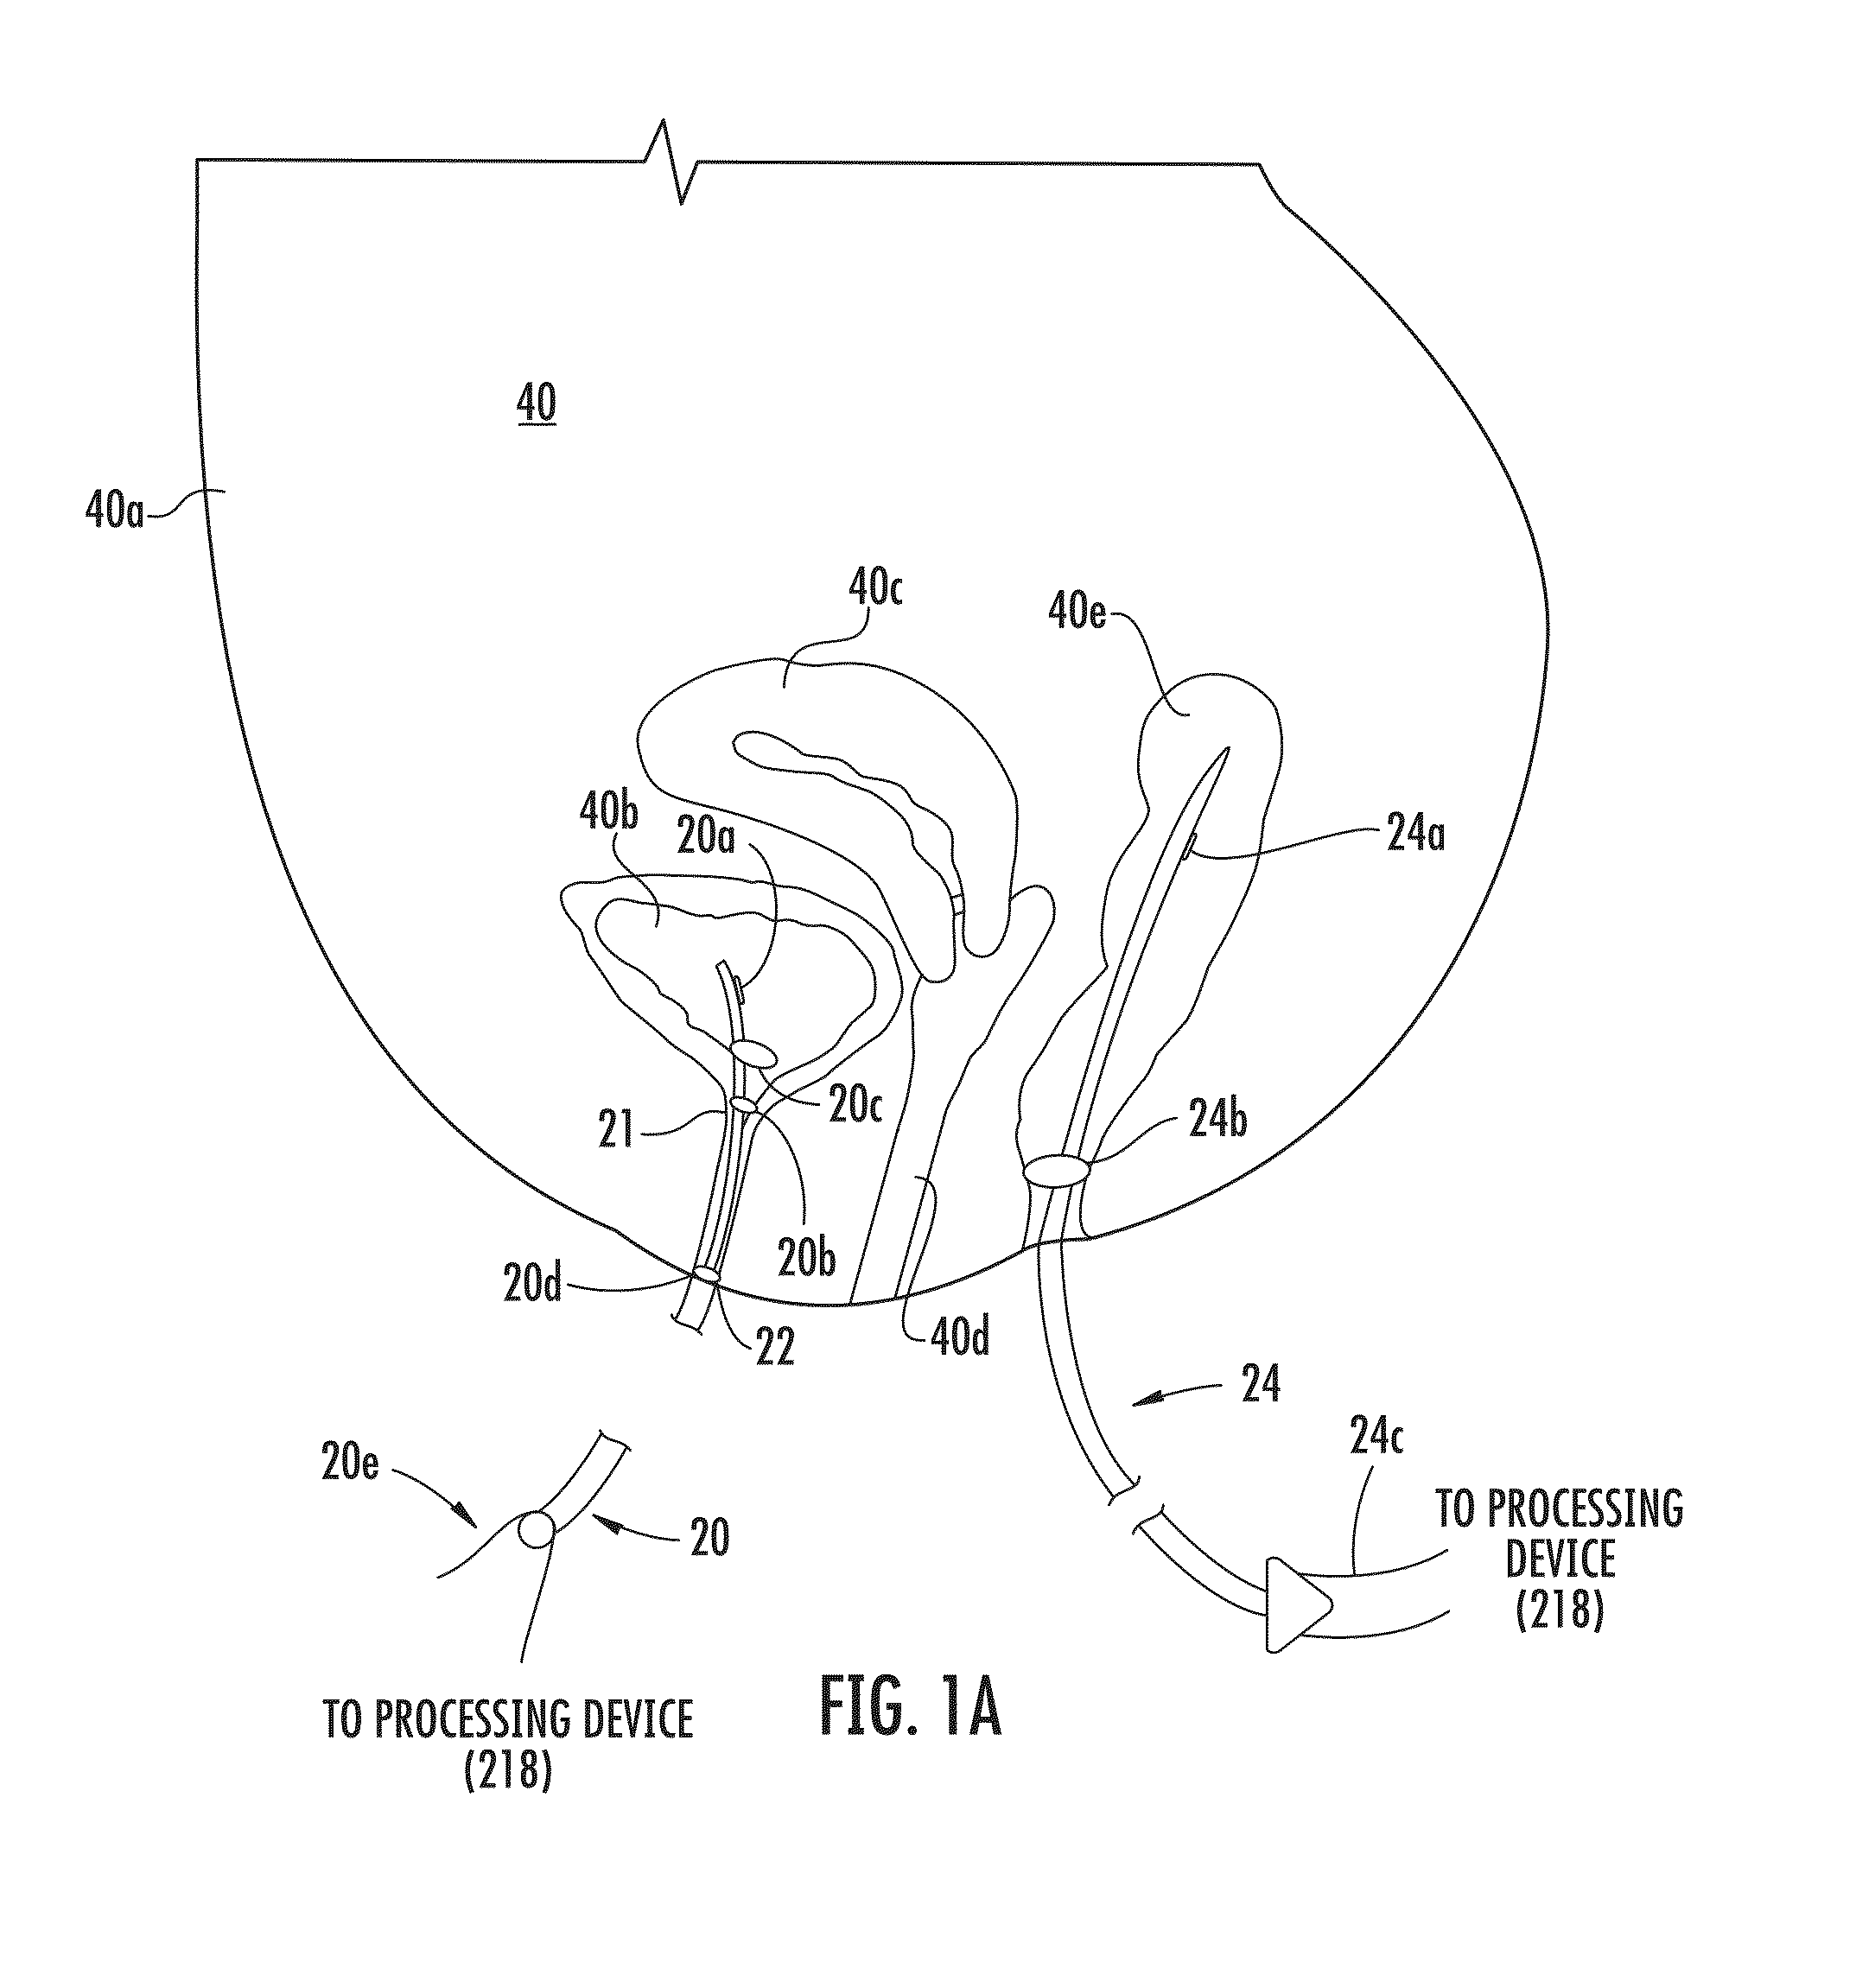 Urinary catheter system for diagnosing a physiological abnormality such as stress urinary incontinence